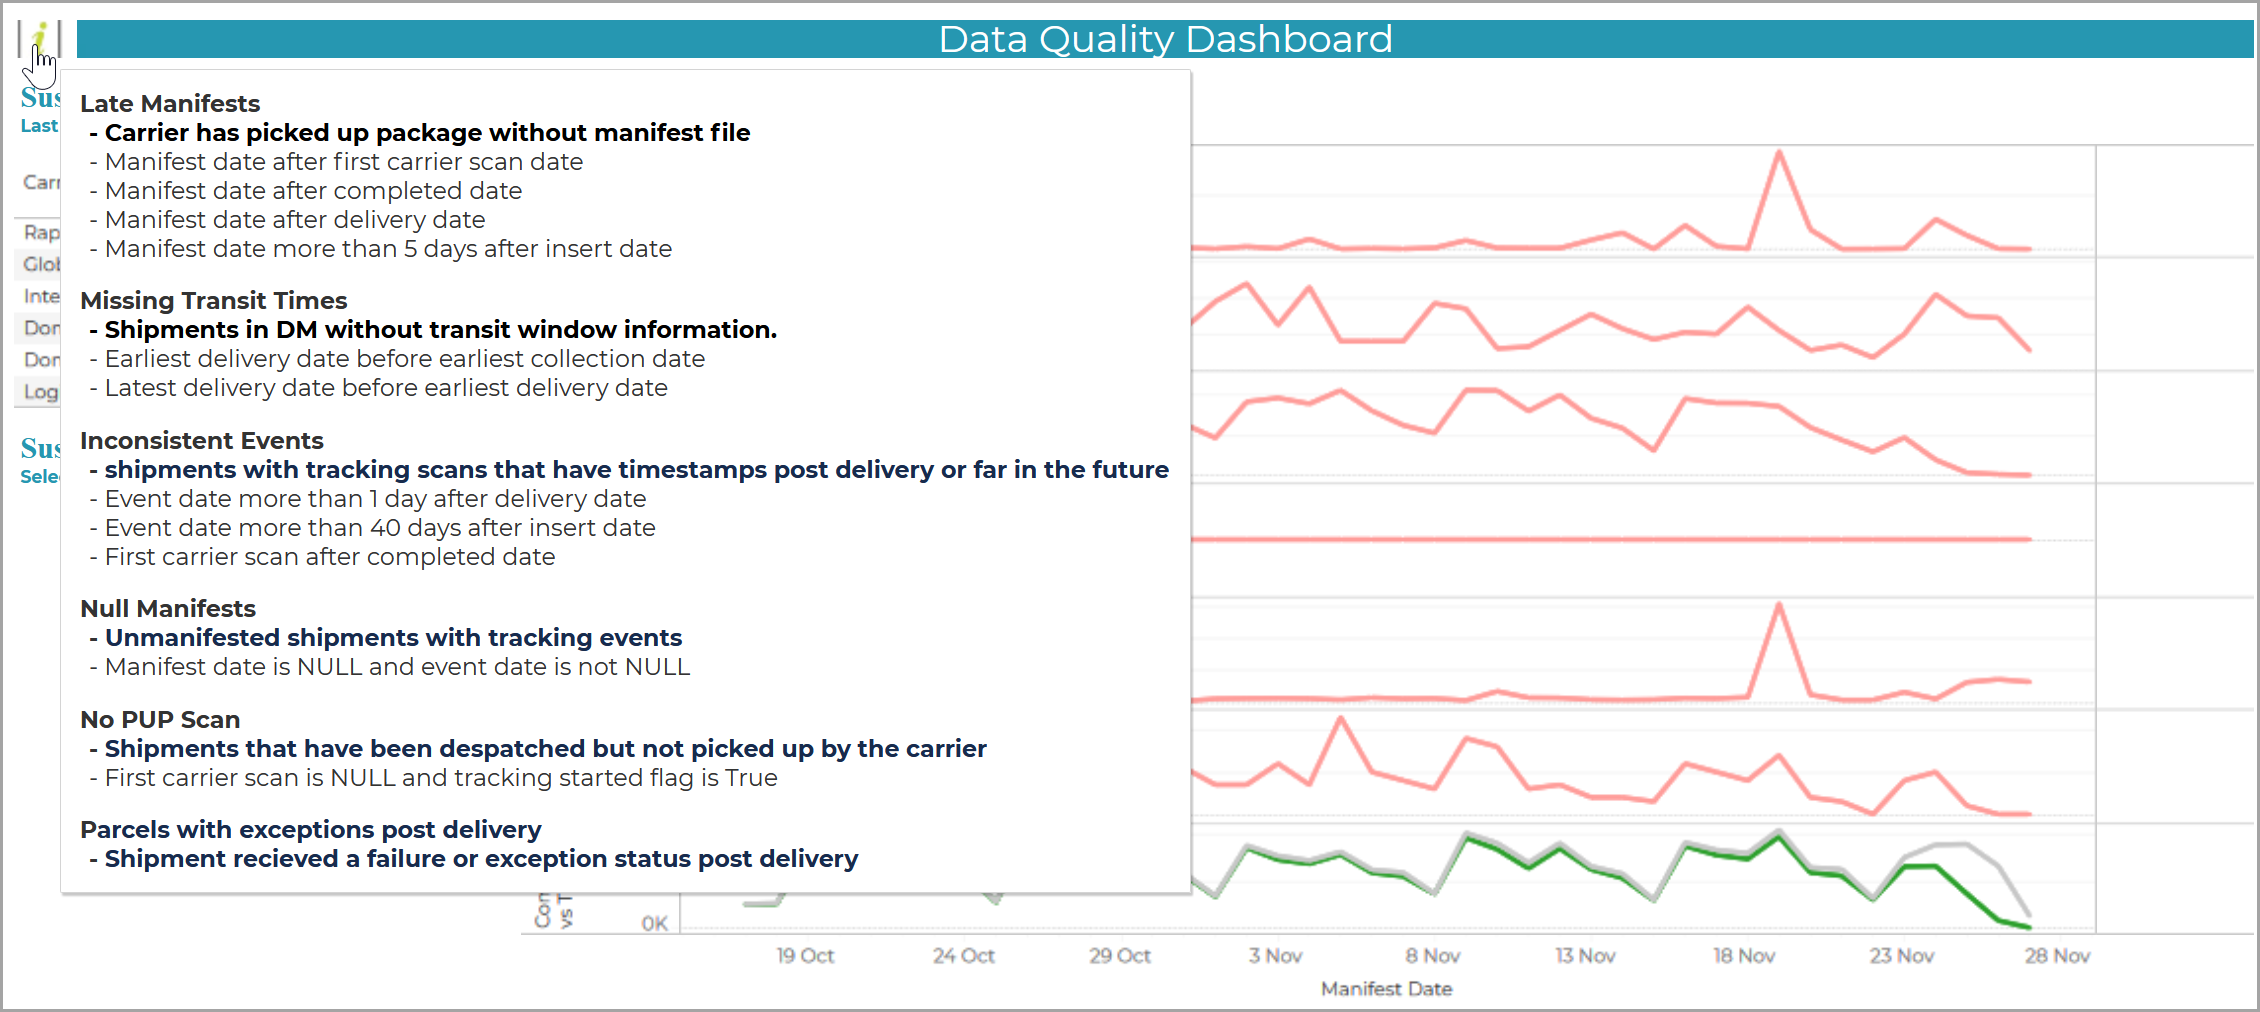 Data_Quality_Dashboard_Help.png